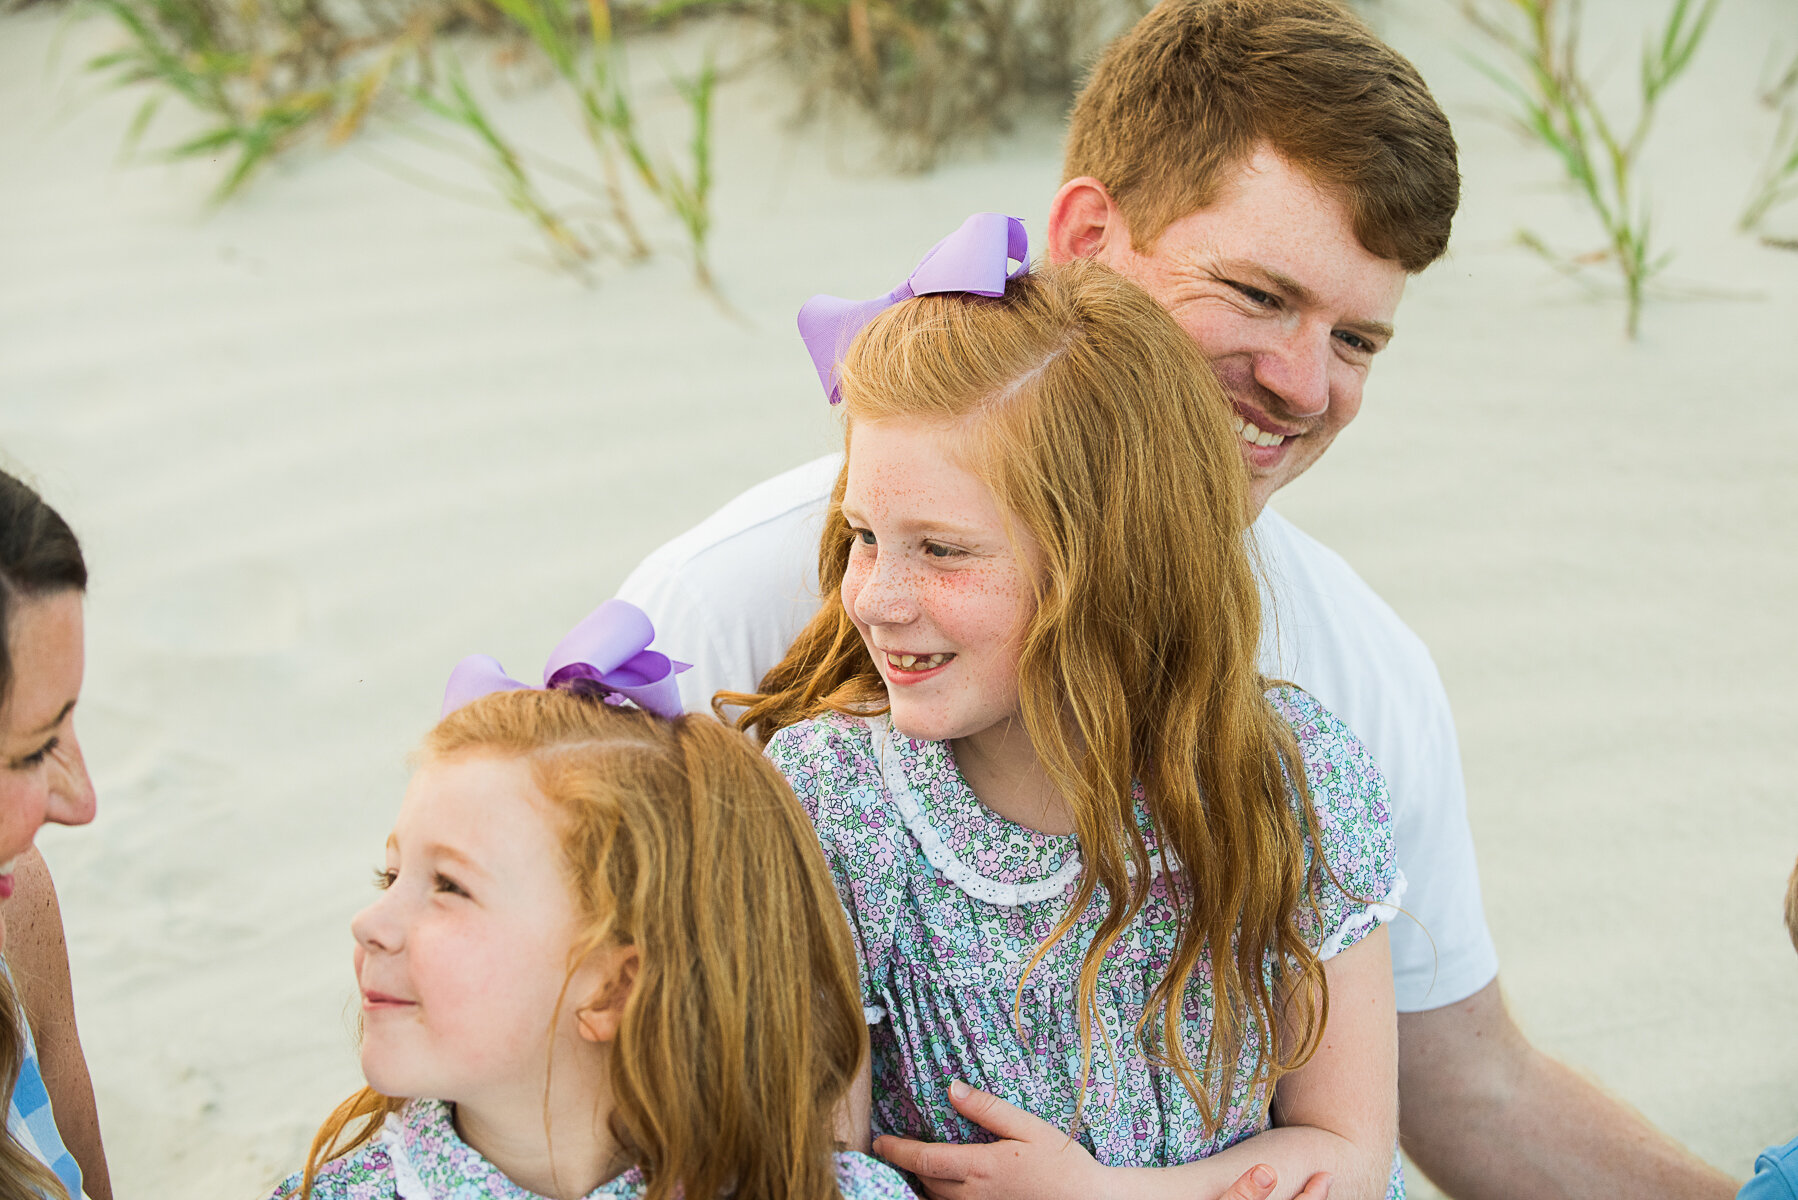  Family portrait by Kiawah Photographer Reese Moore 